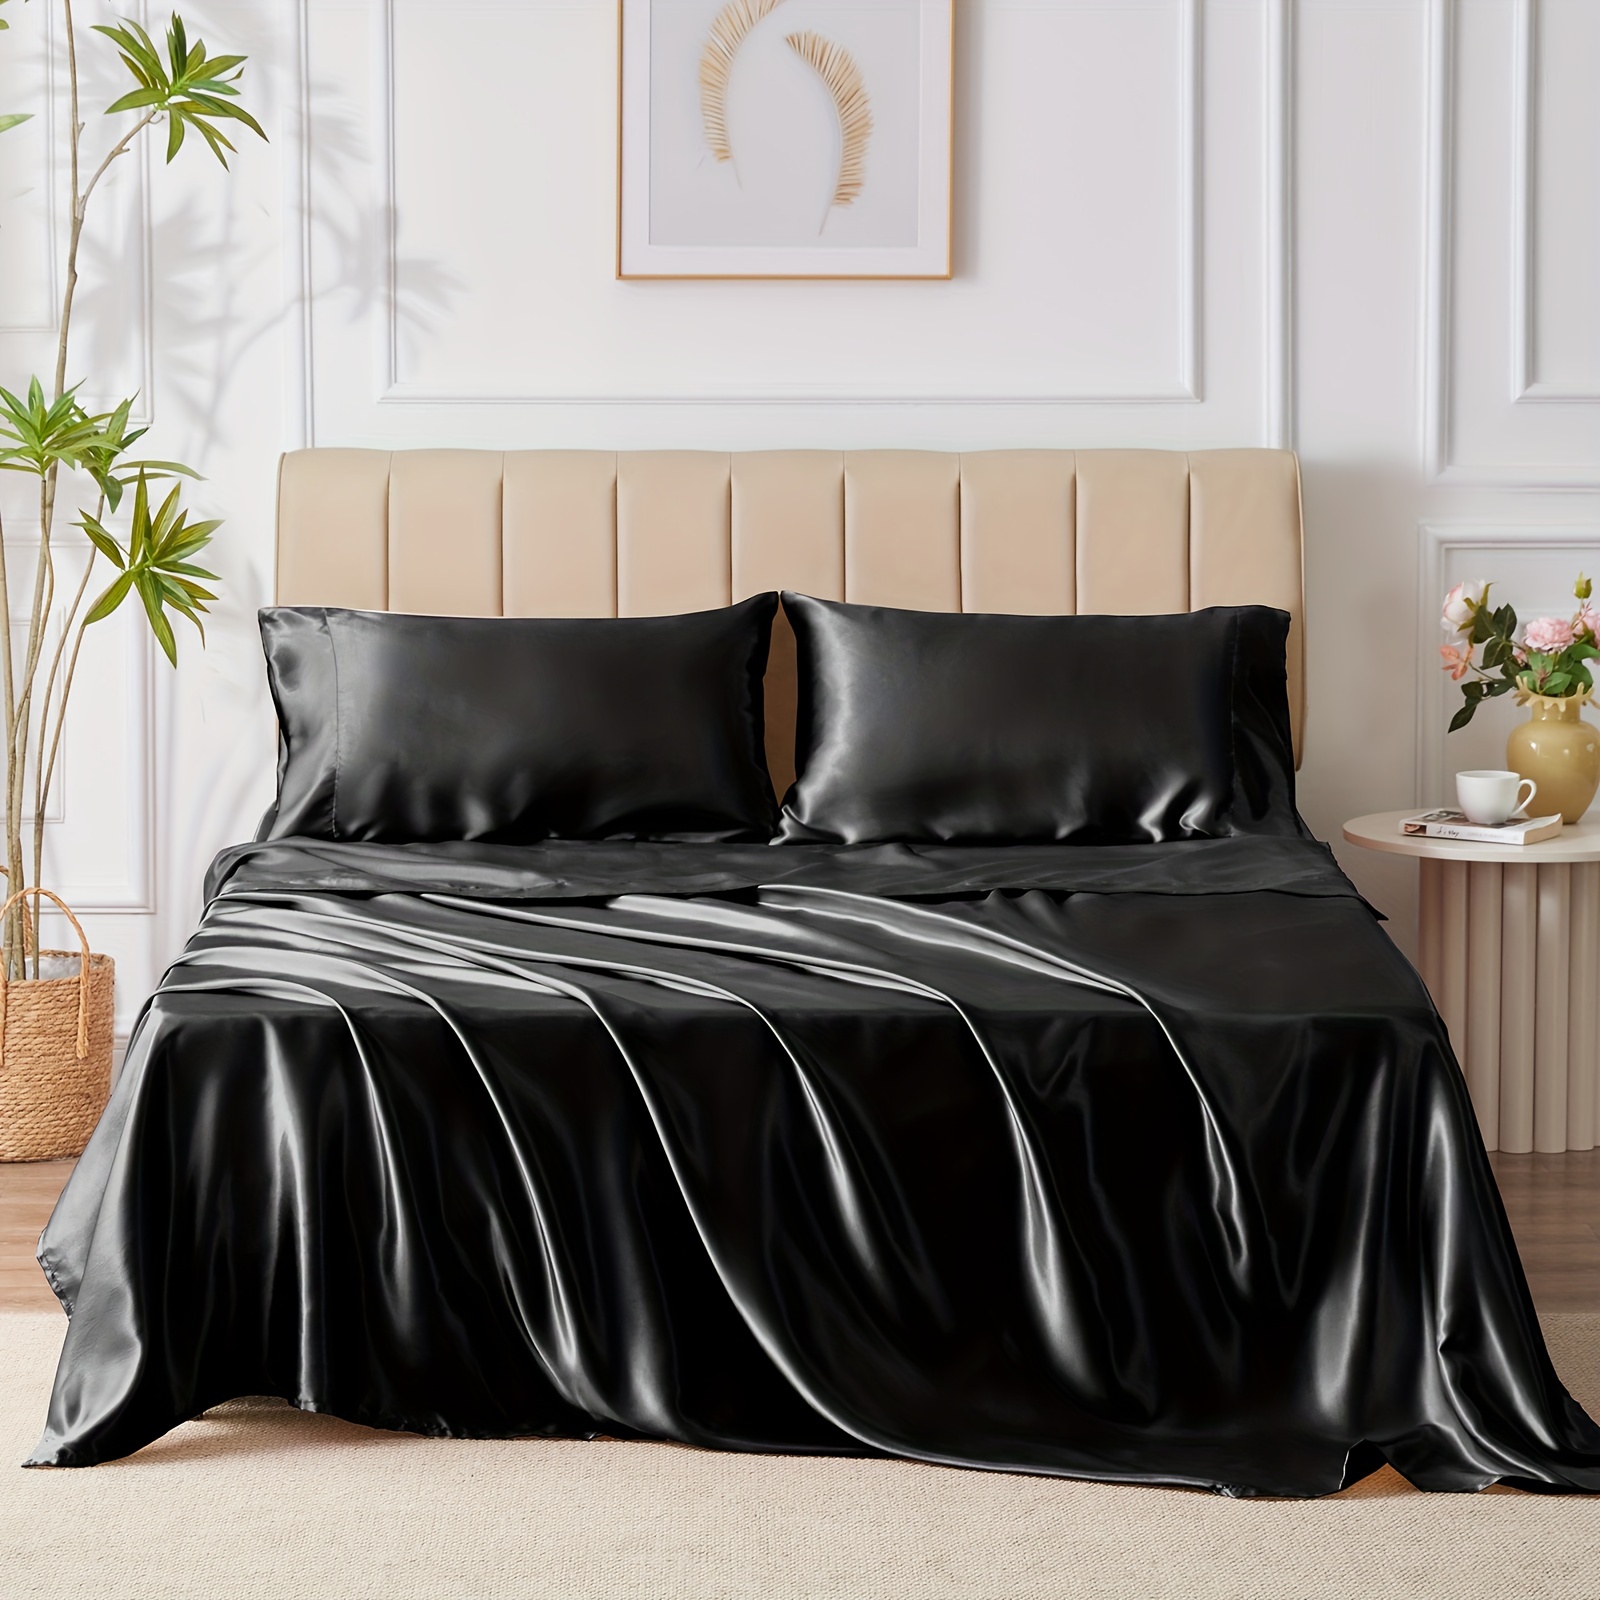 

4pcs Satin Sheets, Bed Sheet Set With Silky Microfiber, 1 Deep Pocket Fitted Sheet, 1 Flat Sheet, And 2 Pillowcases - Smooth And Soft